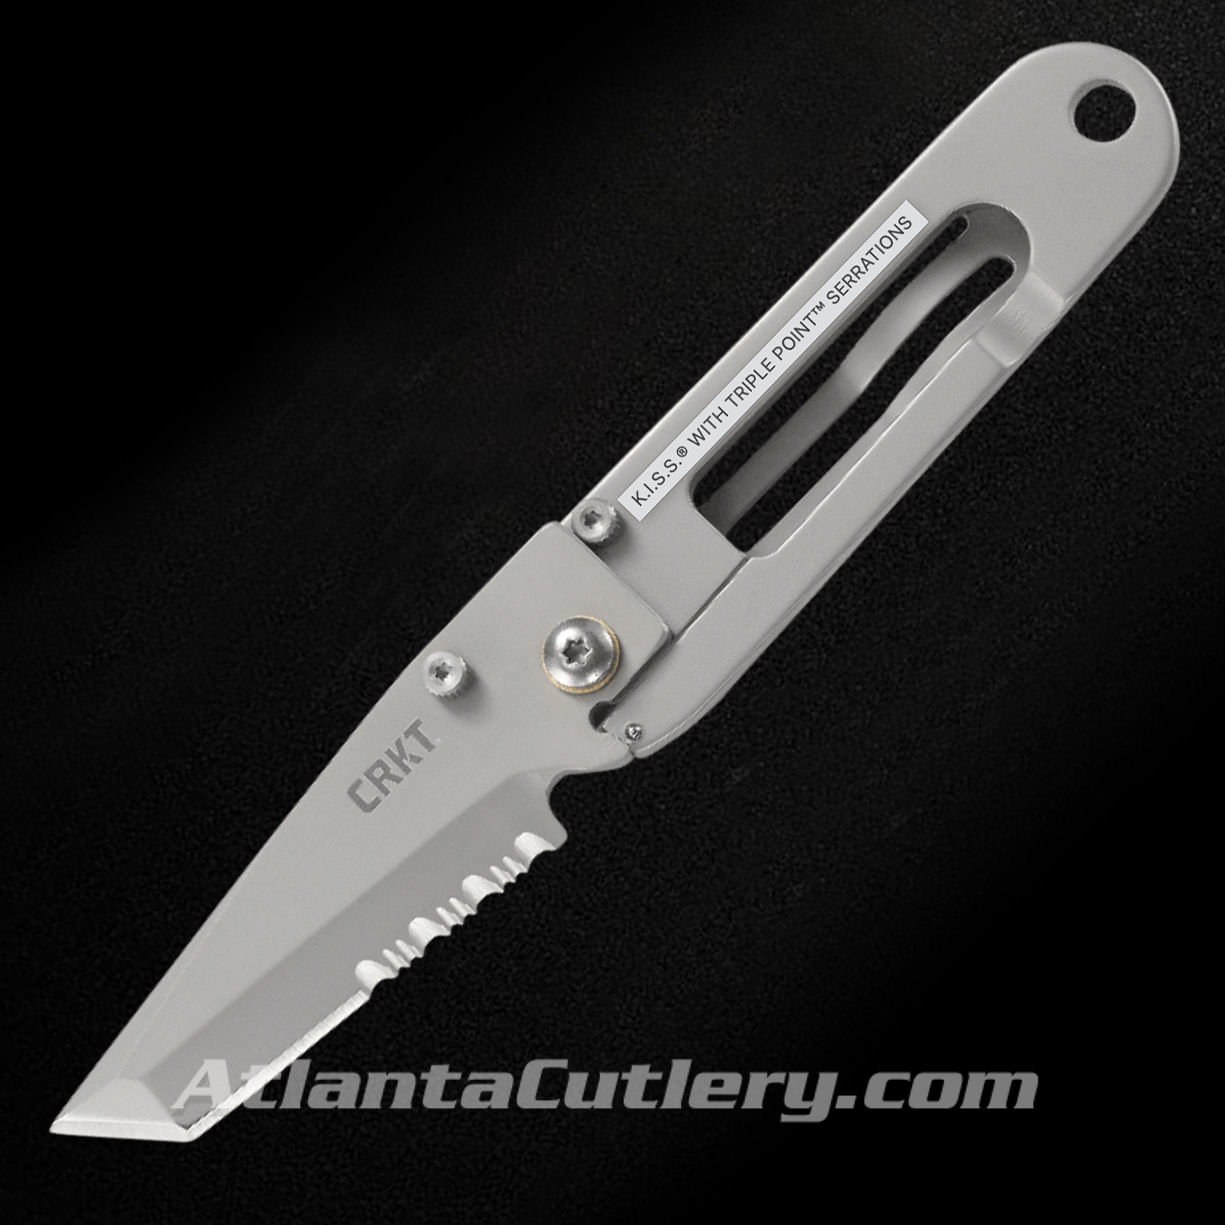 K.I.S.S. Framelock knife has Tanto-inspired blade, can be worn clipped to the pocket, as a money clip knife, or a key chain knife